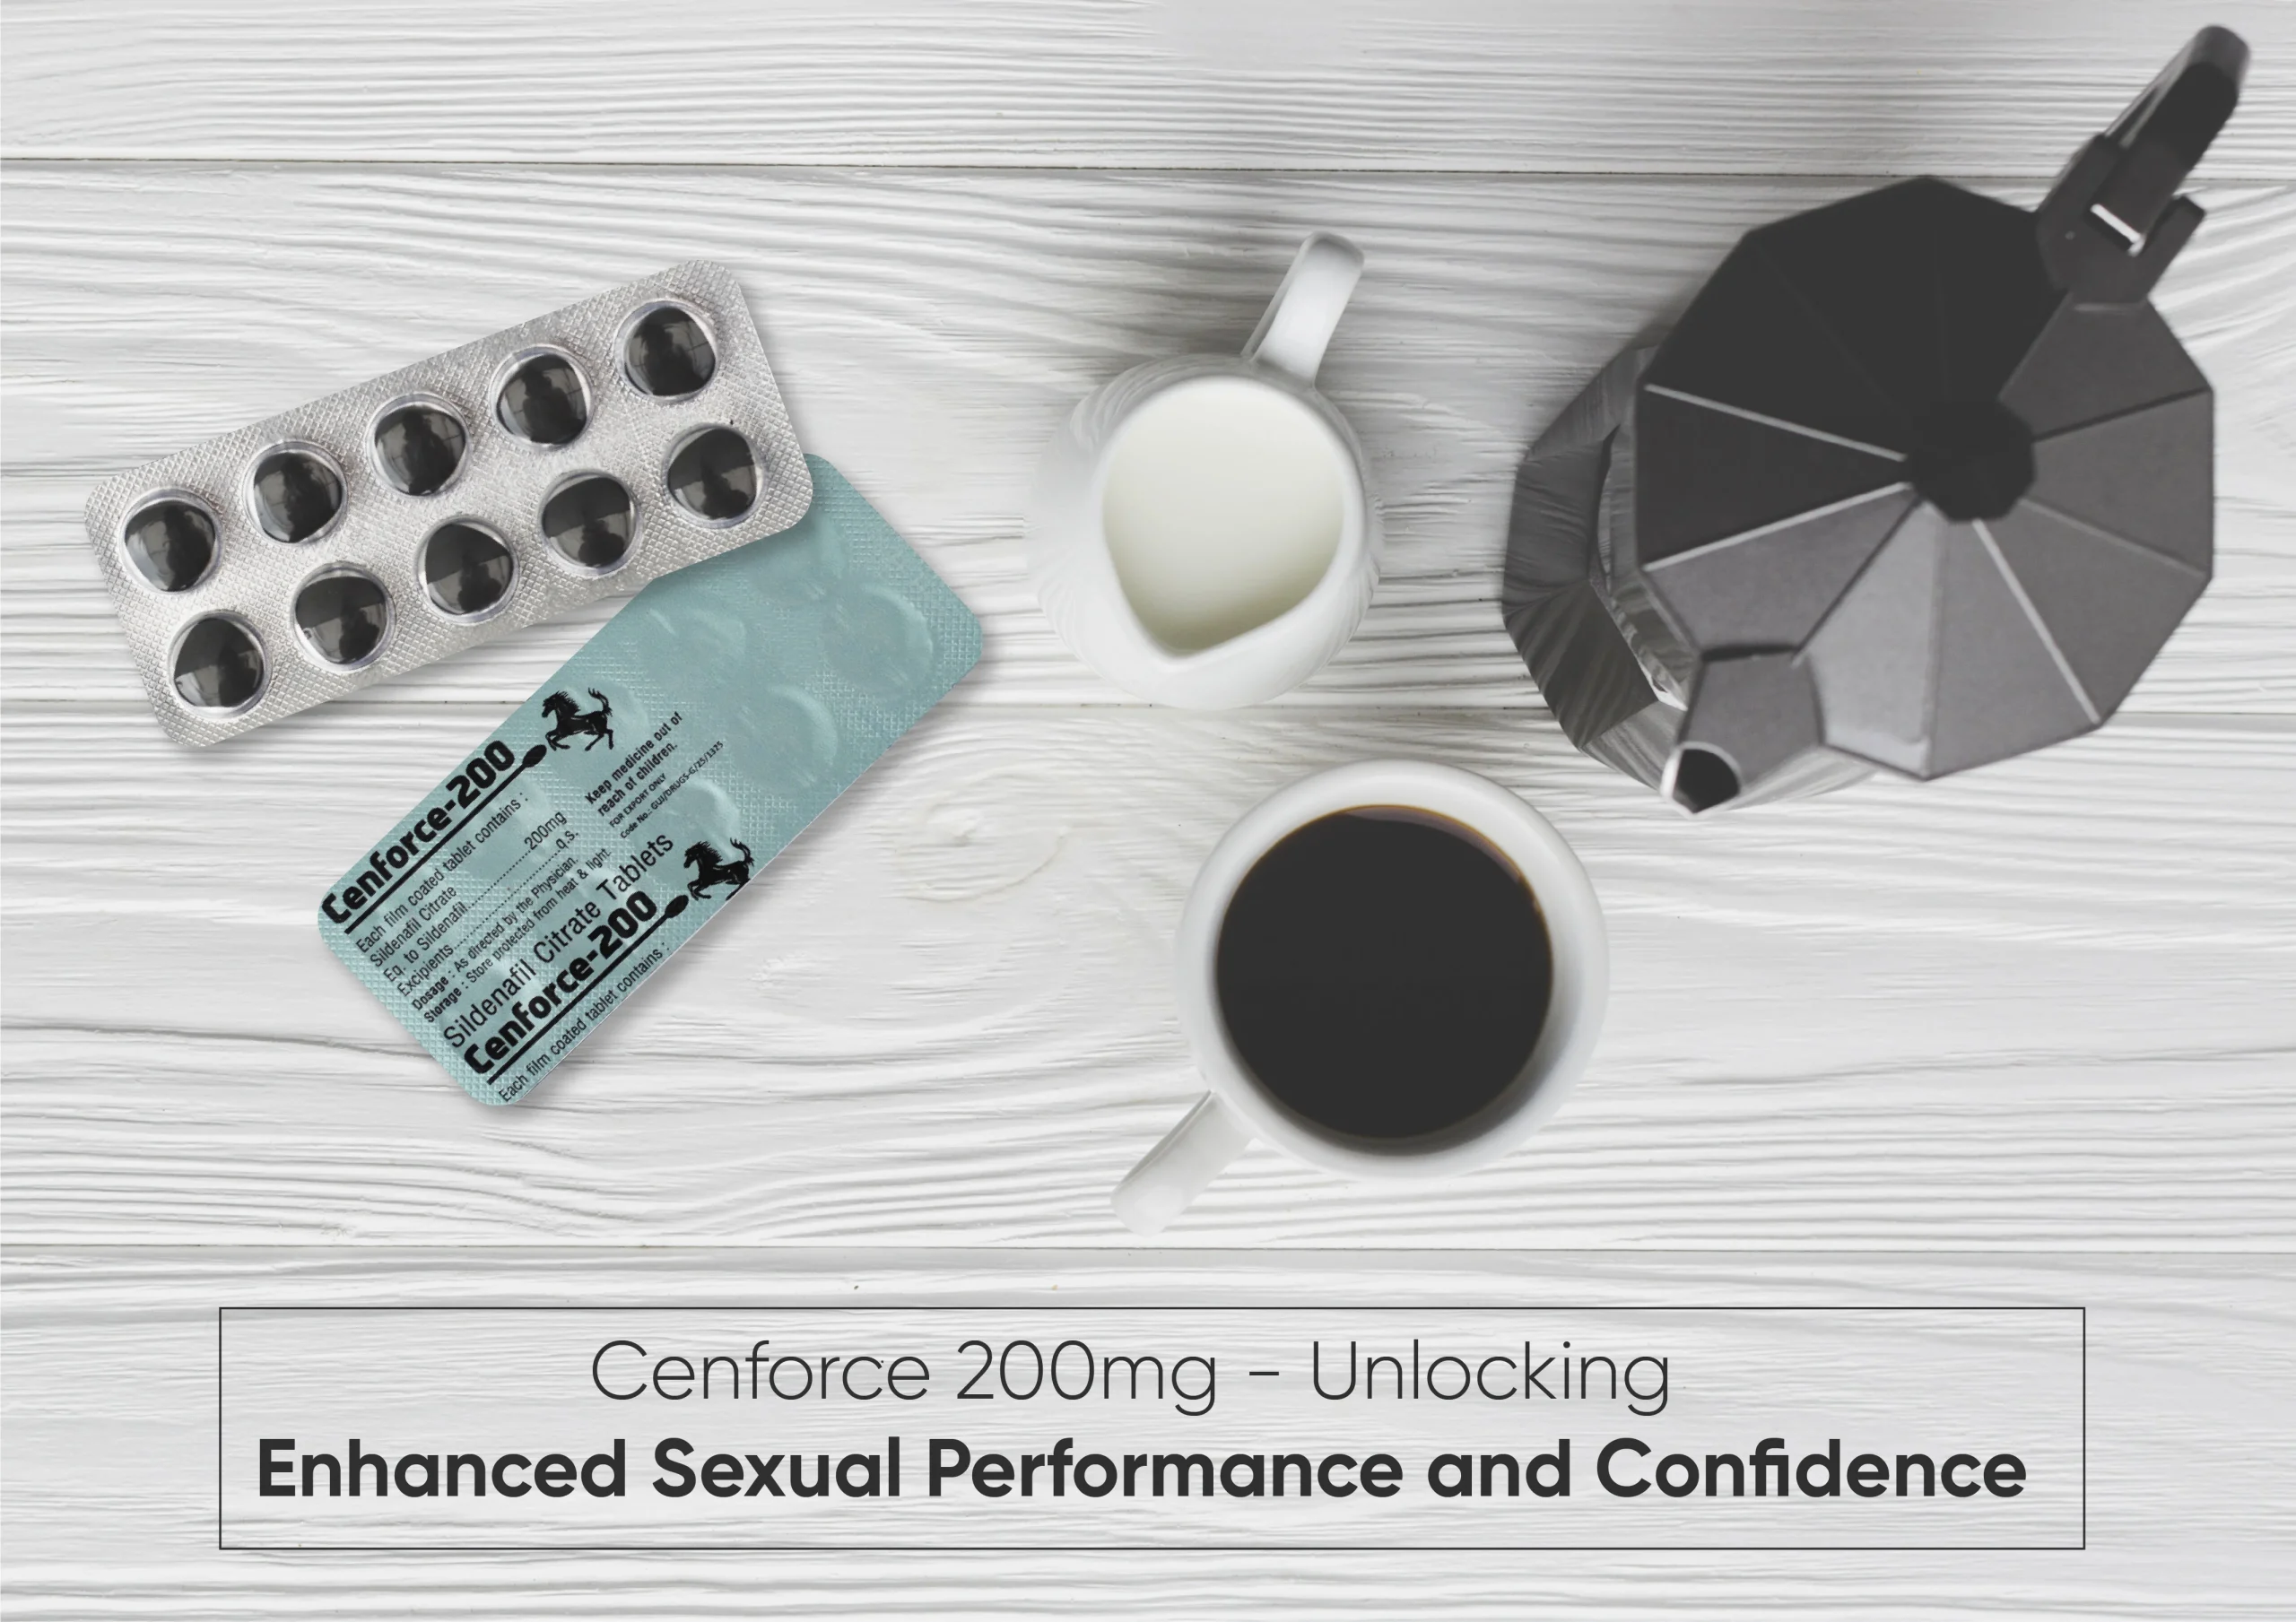 Cenforce 200mg - Unlocking Enhanced Sexual Performance and Confidence